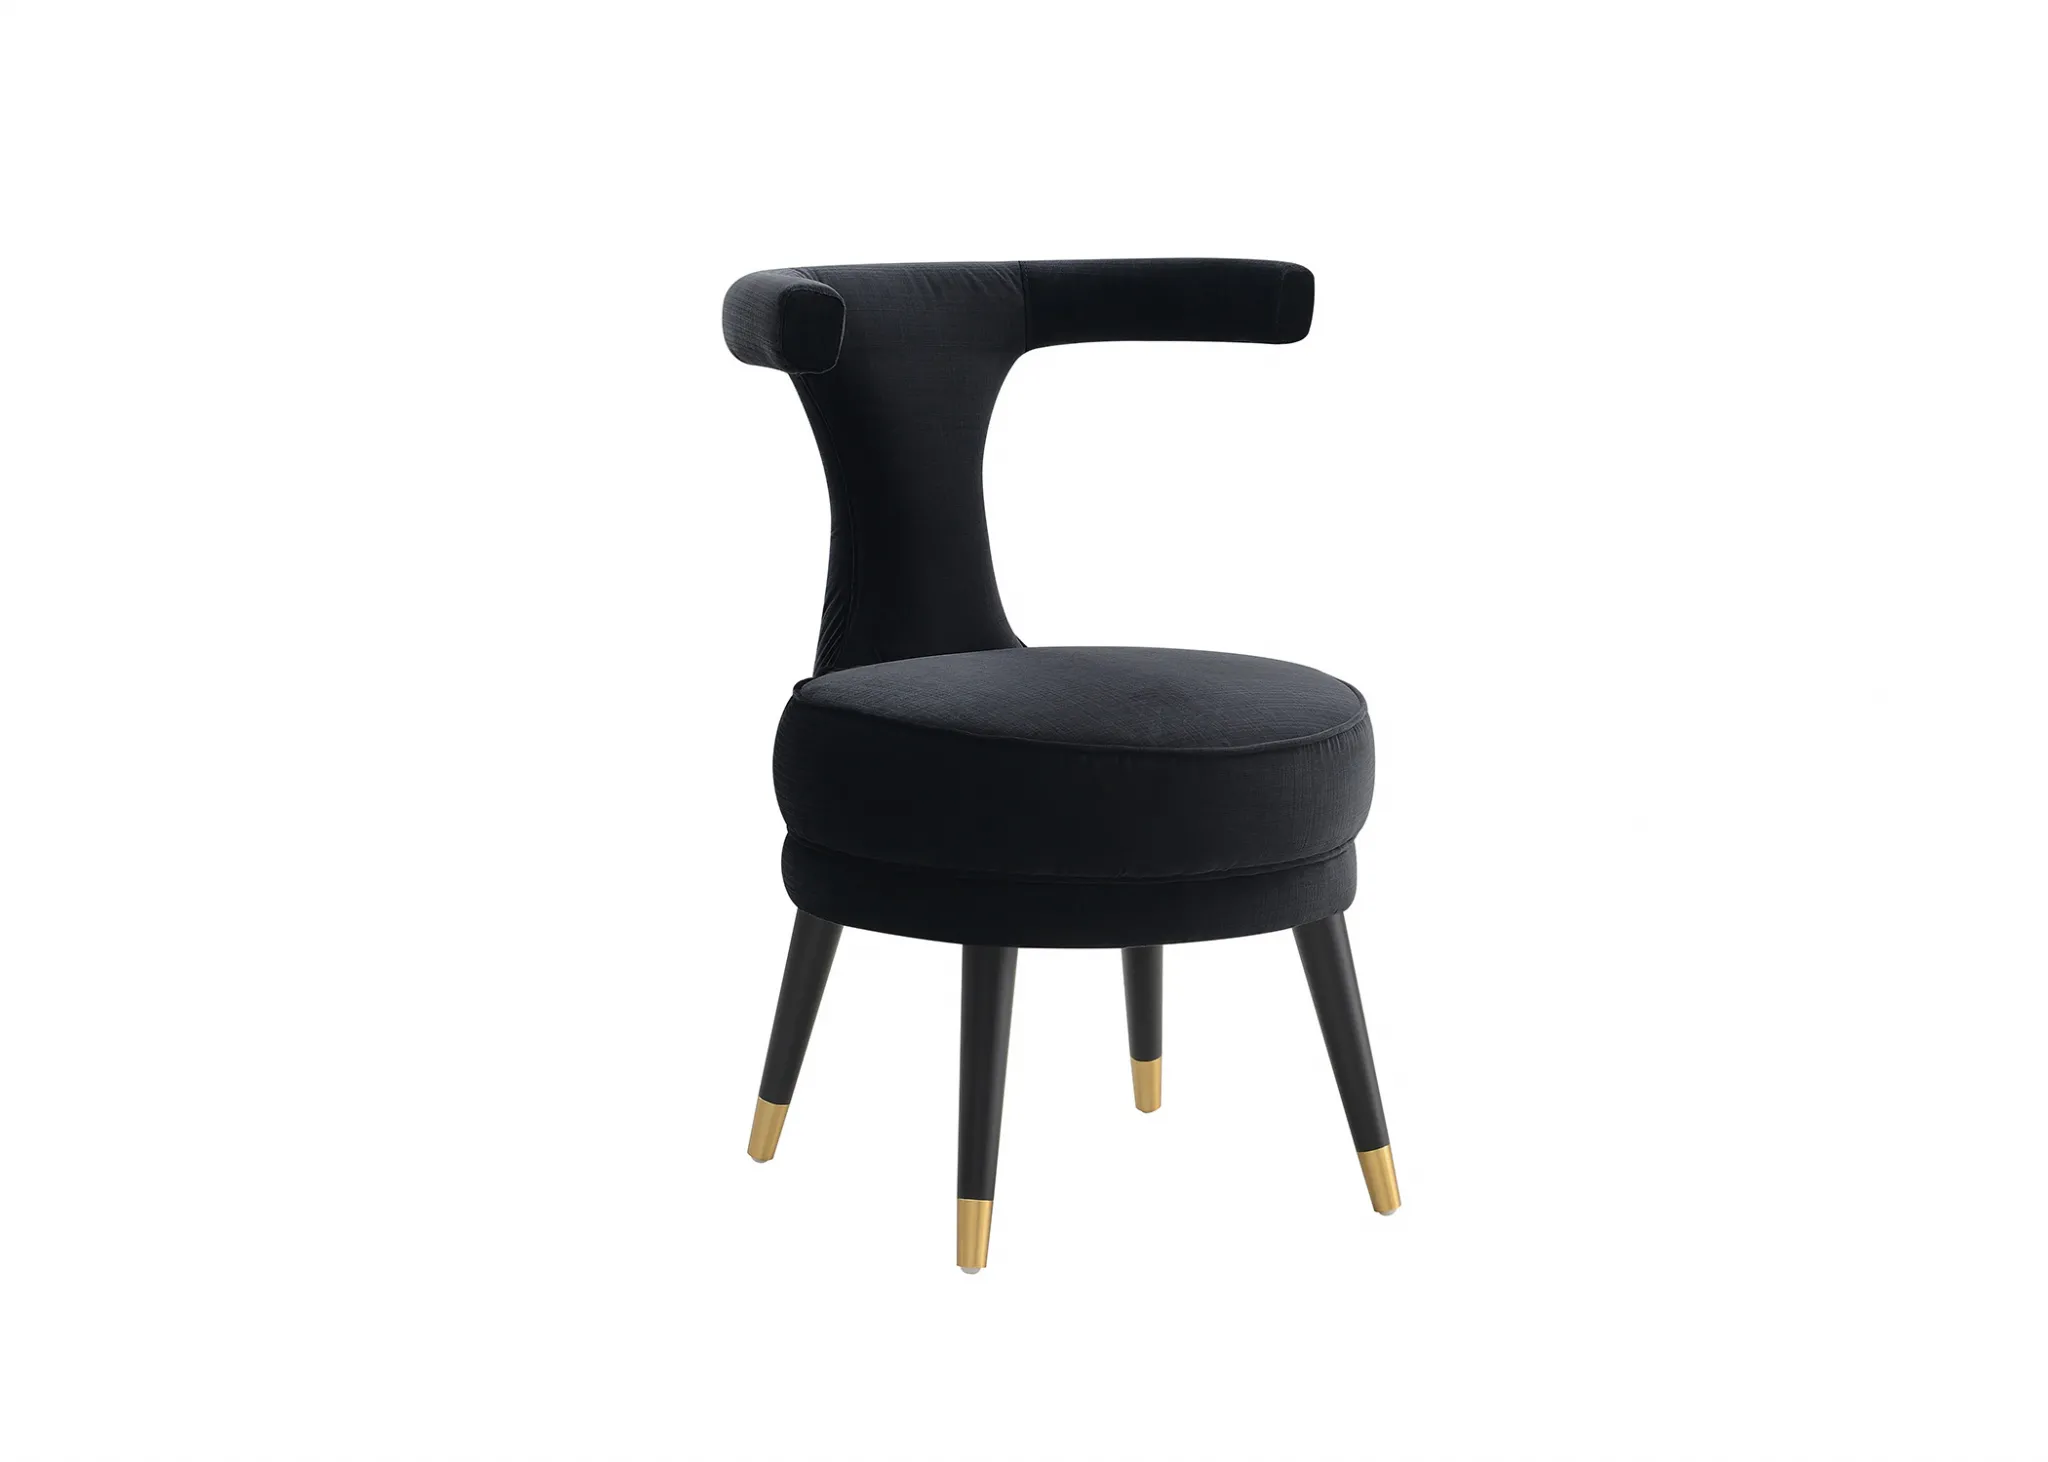 FURNITURE 3D MODELS – CHAIRS – 0119